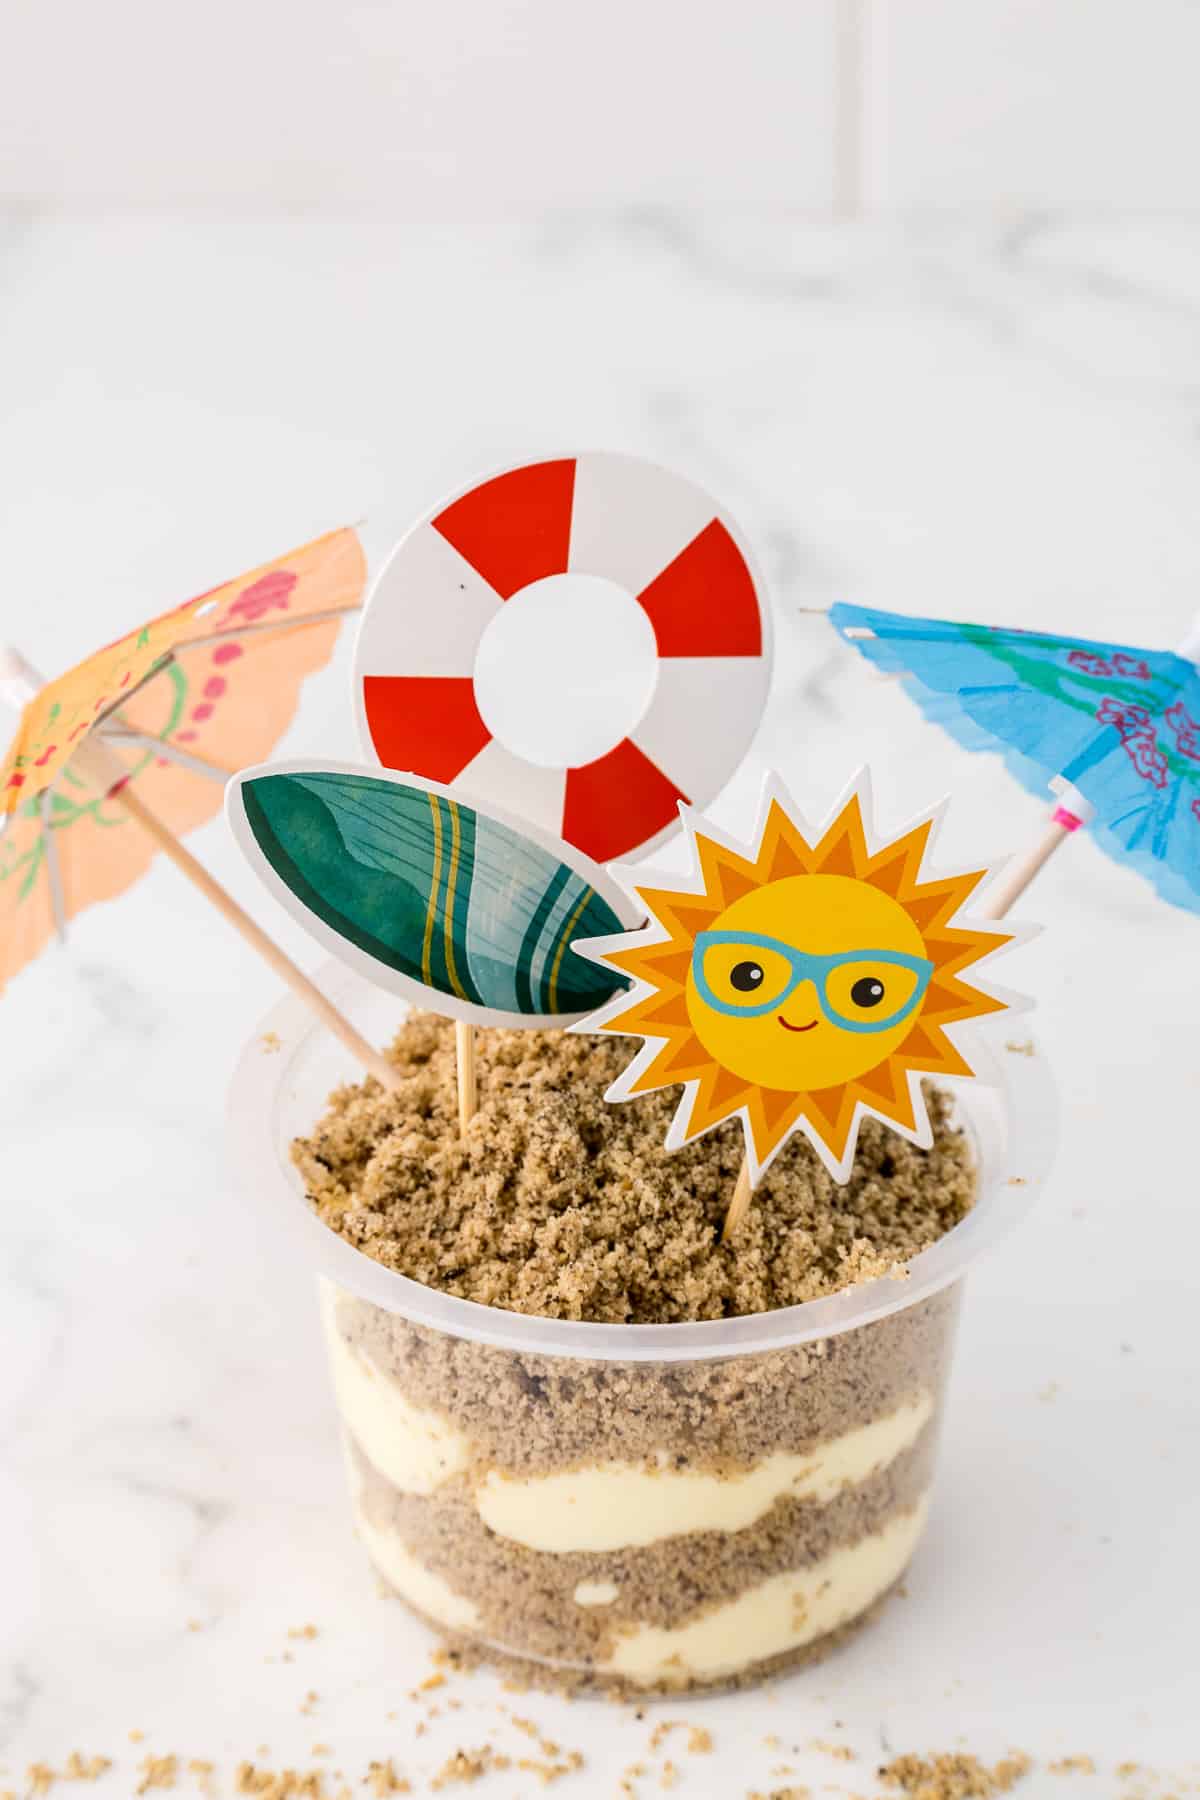 A clear plastic cup filled with pudding and sand made out of crumbled cookies with fun beach graphics.